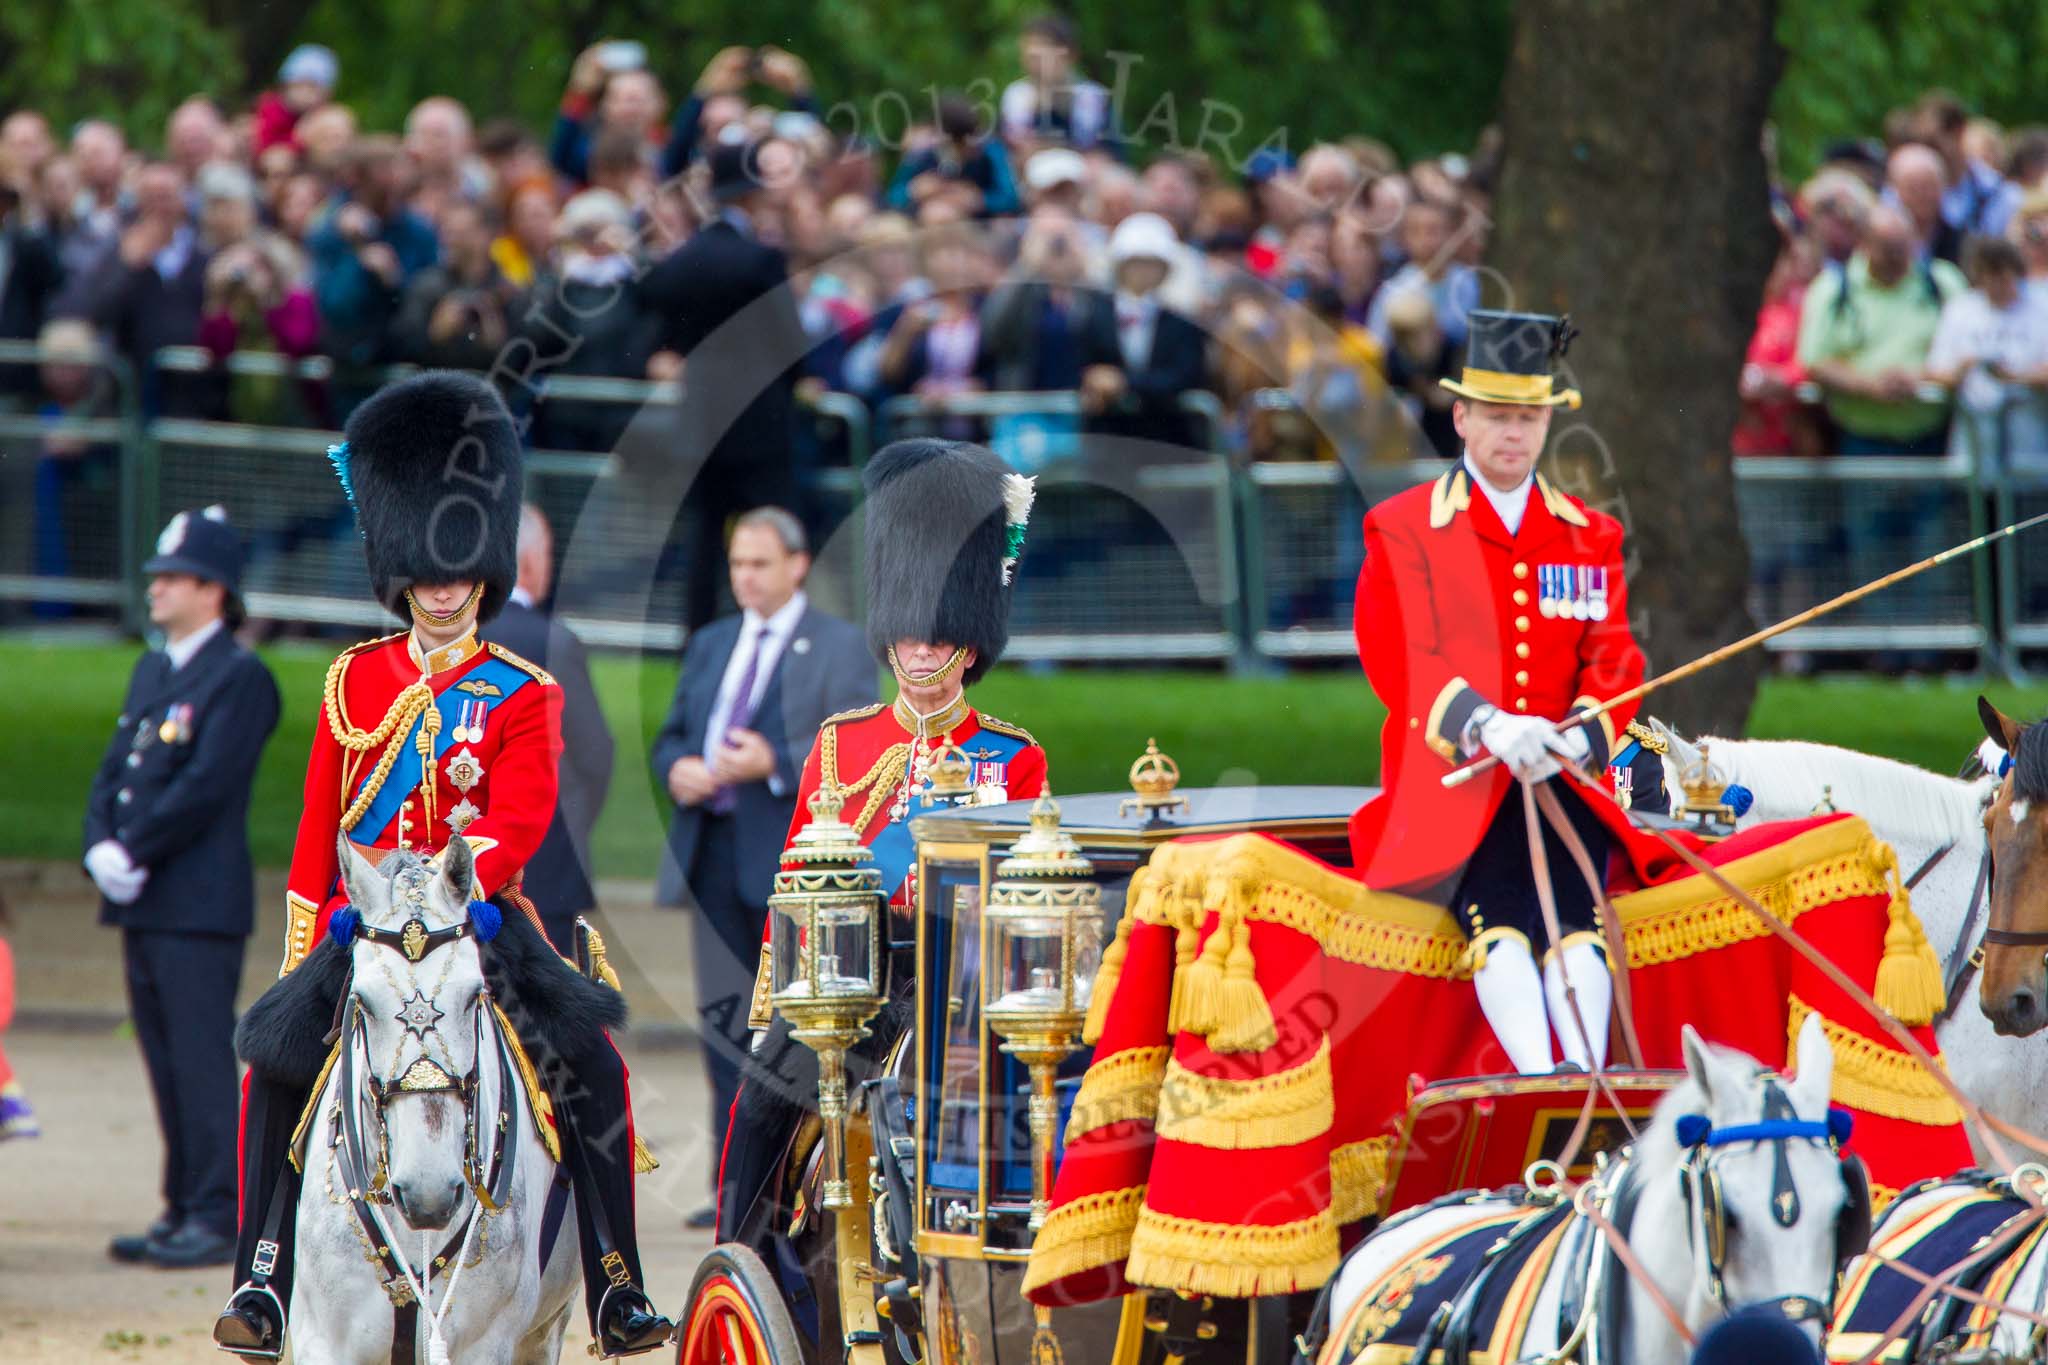 Trooping the Colour 2013: HRH The Duke of Cambridge, Colonel Irish Guards and HRH The Prince of Wales, Colonel Welsh Guards, Royal Colonelsm seen behind the Glass Coach carrying HM The Queen after the Inspection of the Line..
Horse Guards Parade, Westminster,
London SW1,

United Kingdom,
on 15 June 2013 at 11:06, image #359